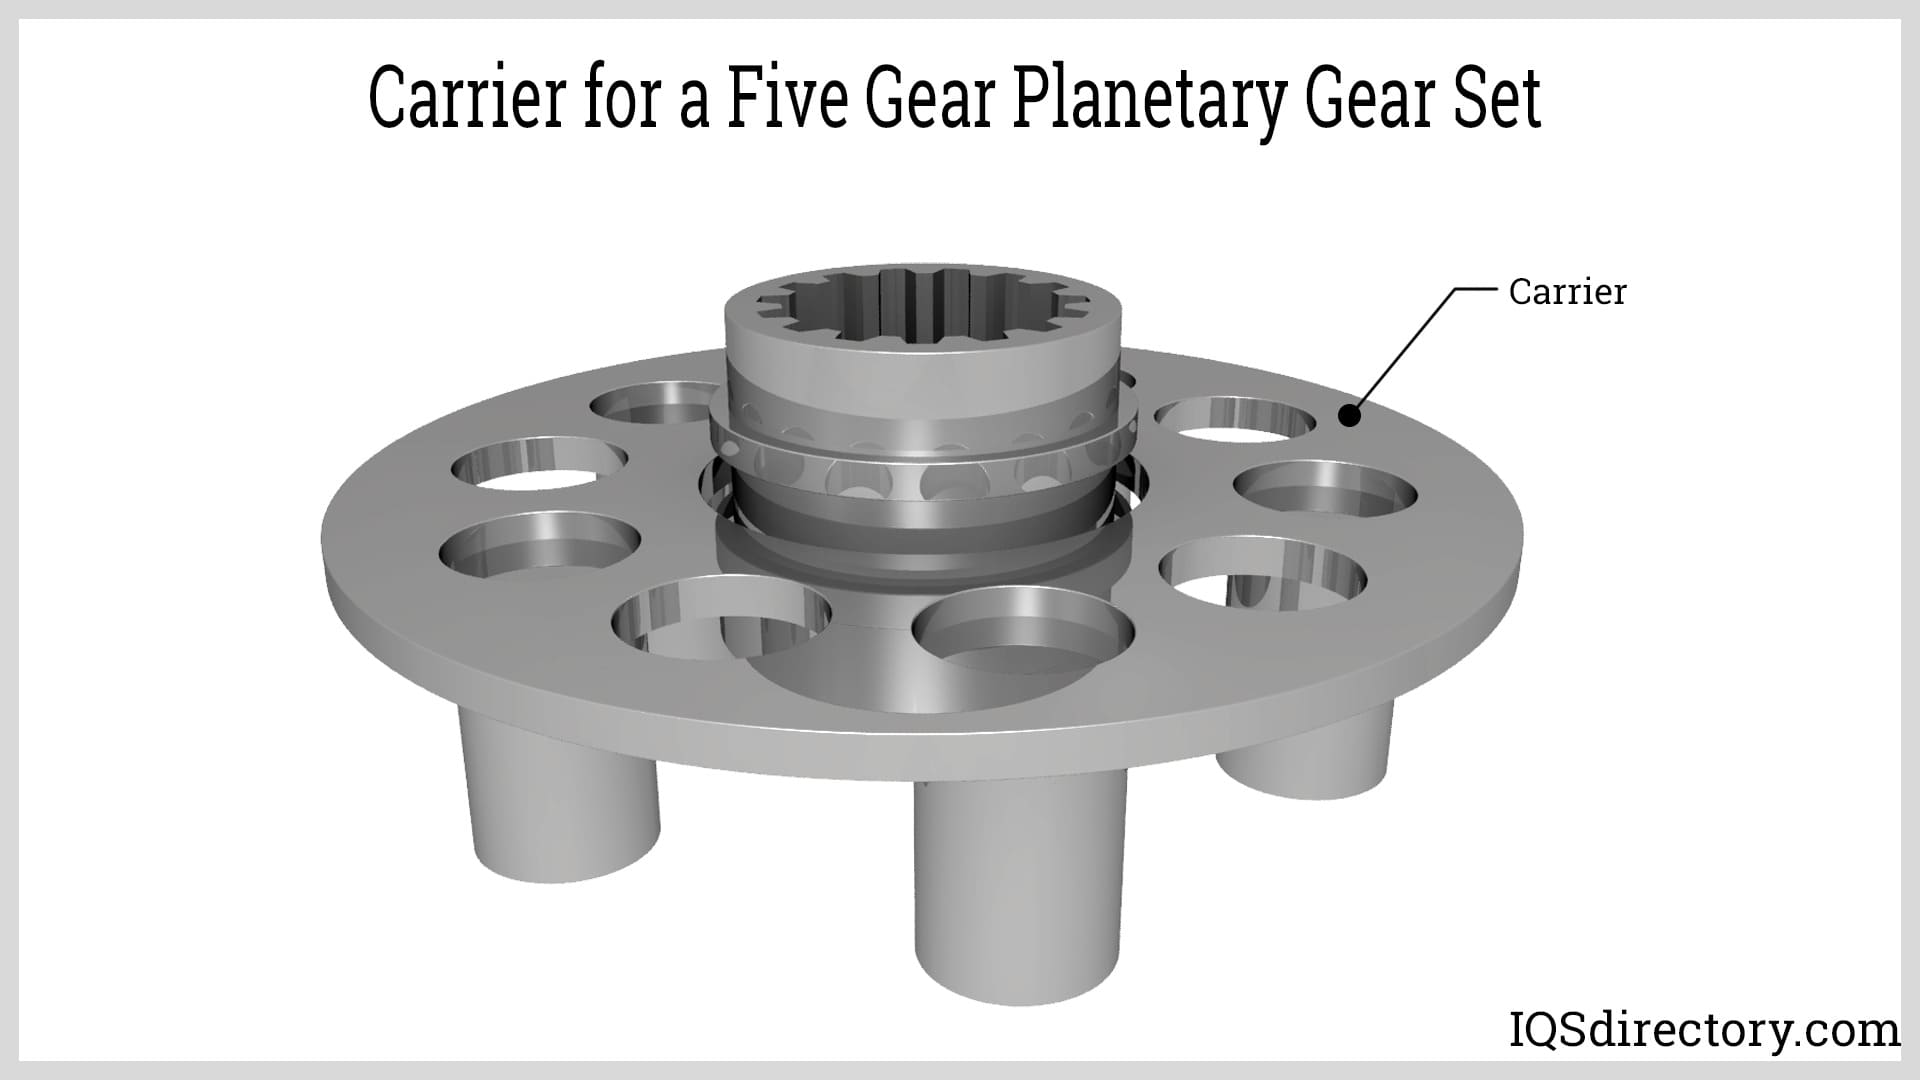 Carrier for a Five Gear Planetary Gear Set